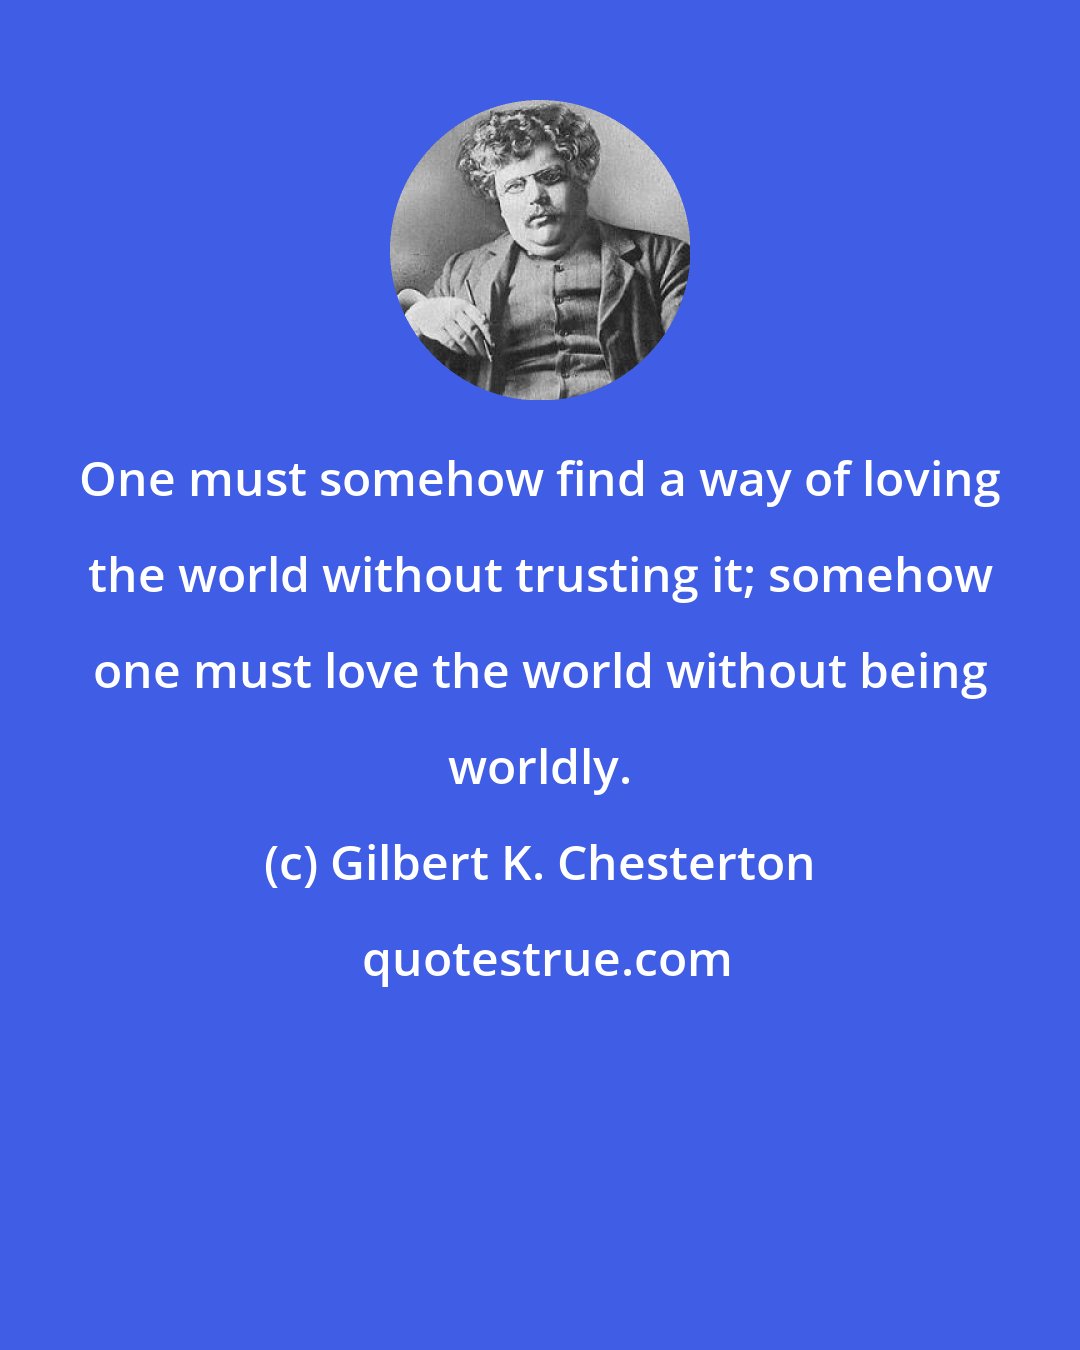 Gilbert K. Chesterton: One must somehow find a way of loving the world without trusting it; somehow one must love the world without being worldly.